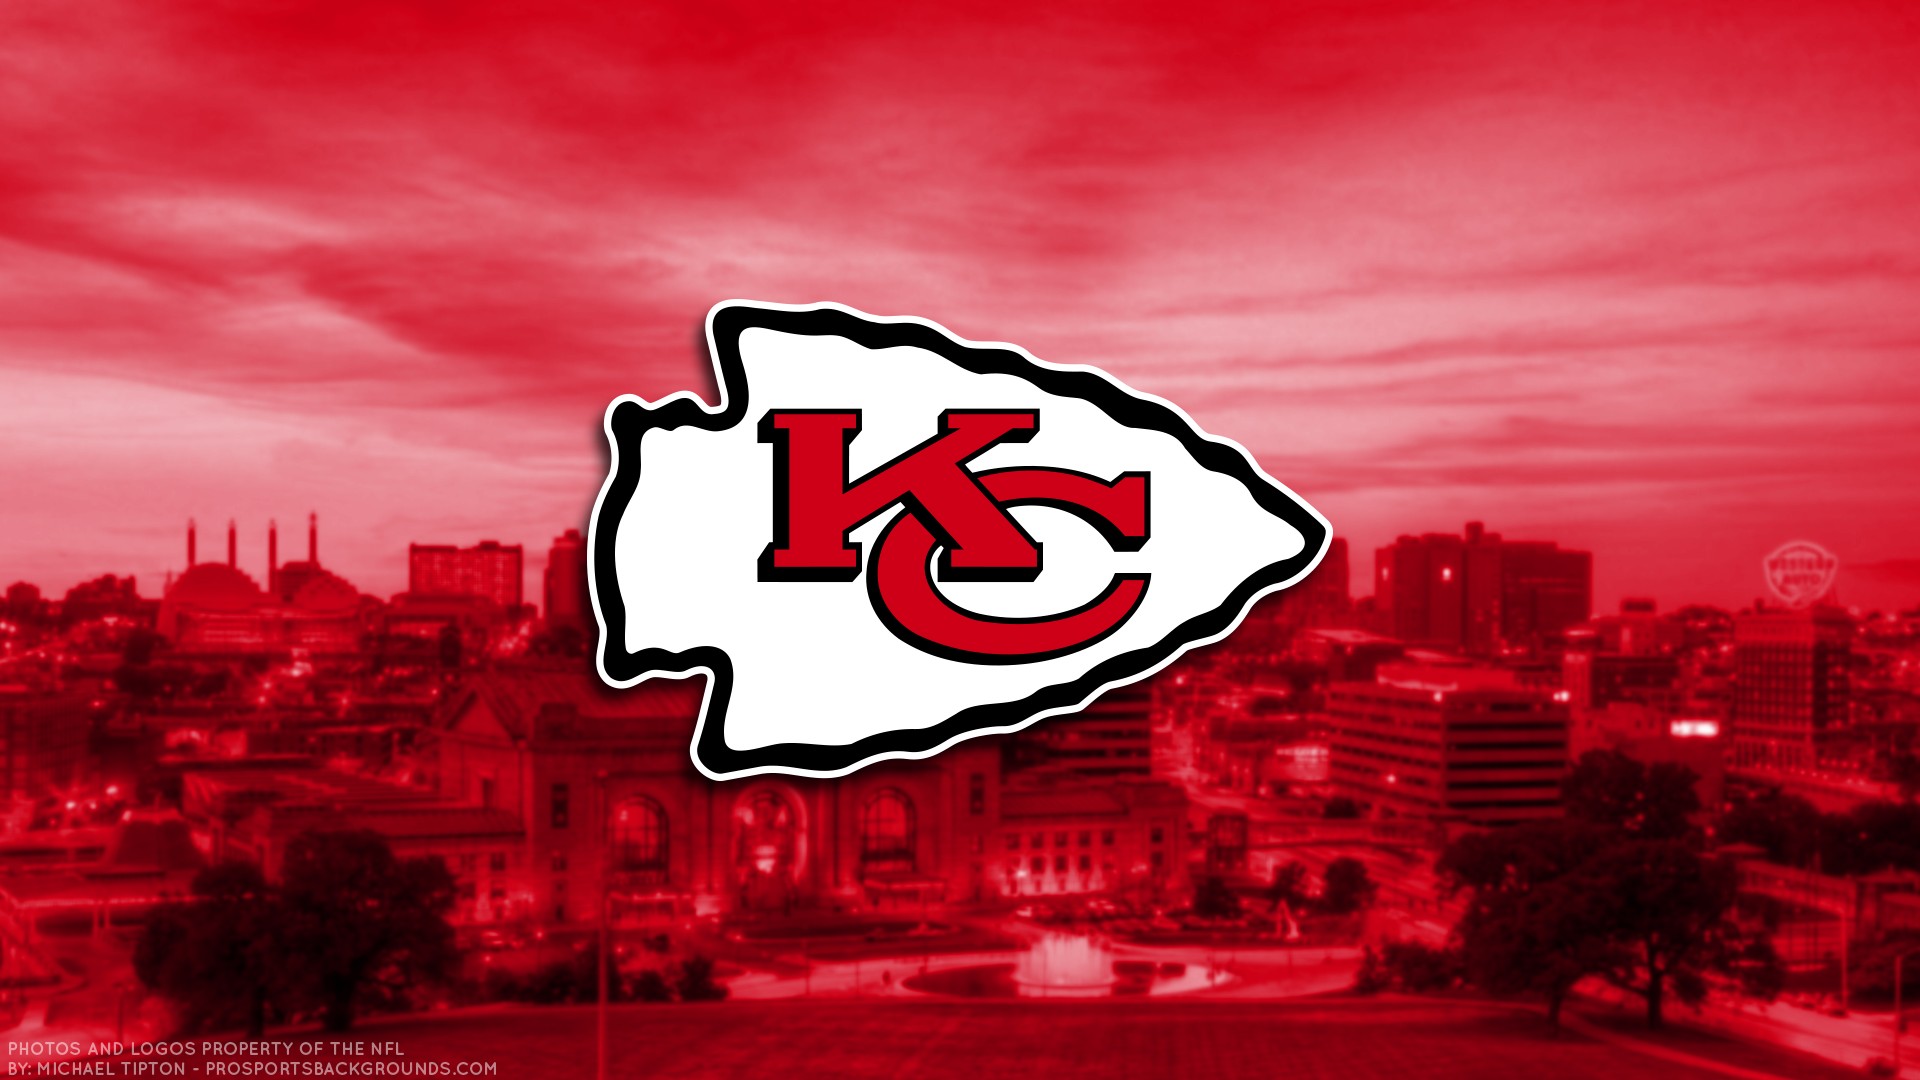 Kansas City Chiefs NFL Wallpaper HD with high-resolution 1920x1080 pixel. You can use this wallpaper for your Mac or Windows Desktop Background, iPhone, Android or Tablet and another Smartphone device